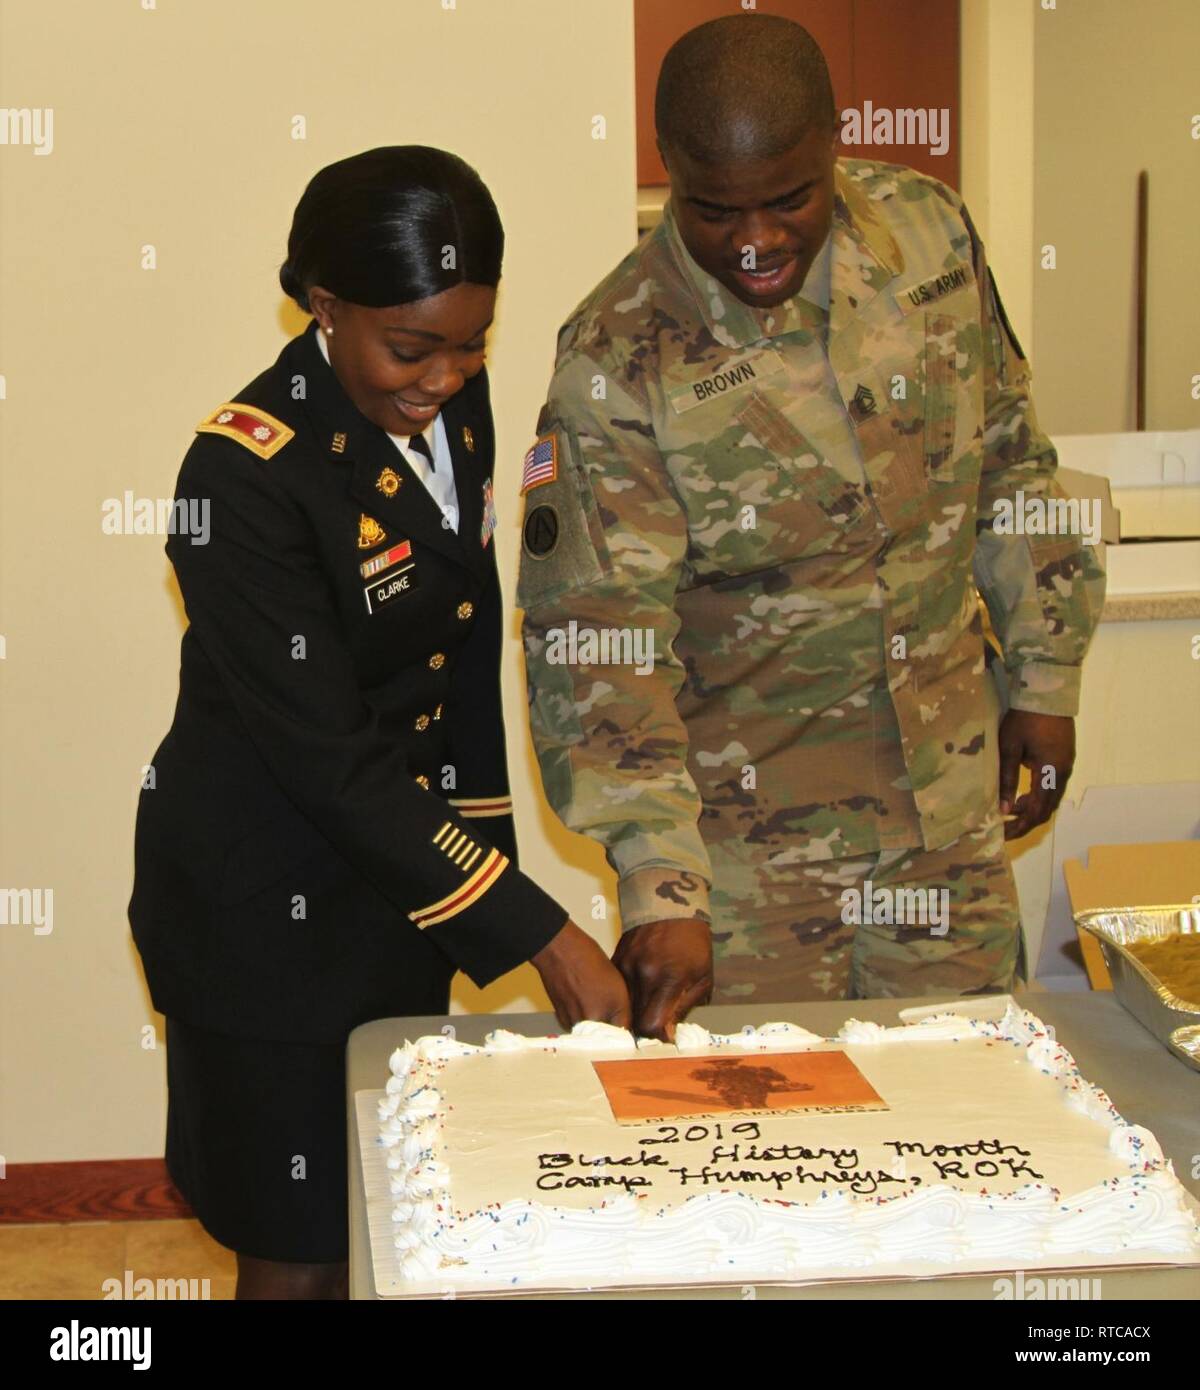 Lt. Col. Natasha Clarke, commander, 194th Combat Sustainment Support Battalion, 2nd Infantry Division, and Sgt.1st. Class Yukon Brown, Human Resources Company, Headquarters, and Headquarters Battalion, 2nd Infantry Division, cut the cake following the African-American History Month Observance on Feb.12, 2019, Camp Humphreys, Republic of Korea. Clarke was the guest speaker for this year's observance and spoke on Black Migration which highlighted African-American achievements in the United States. Stock Photo